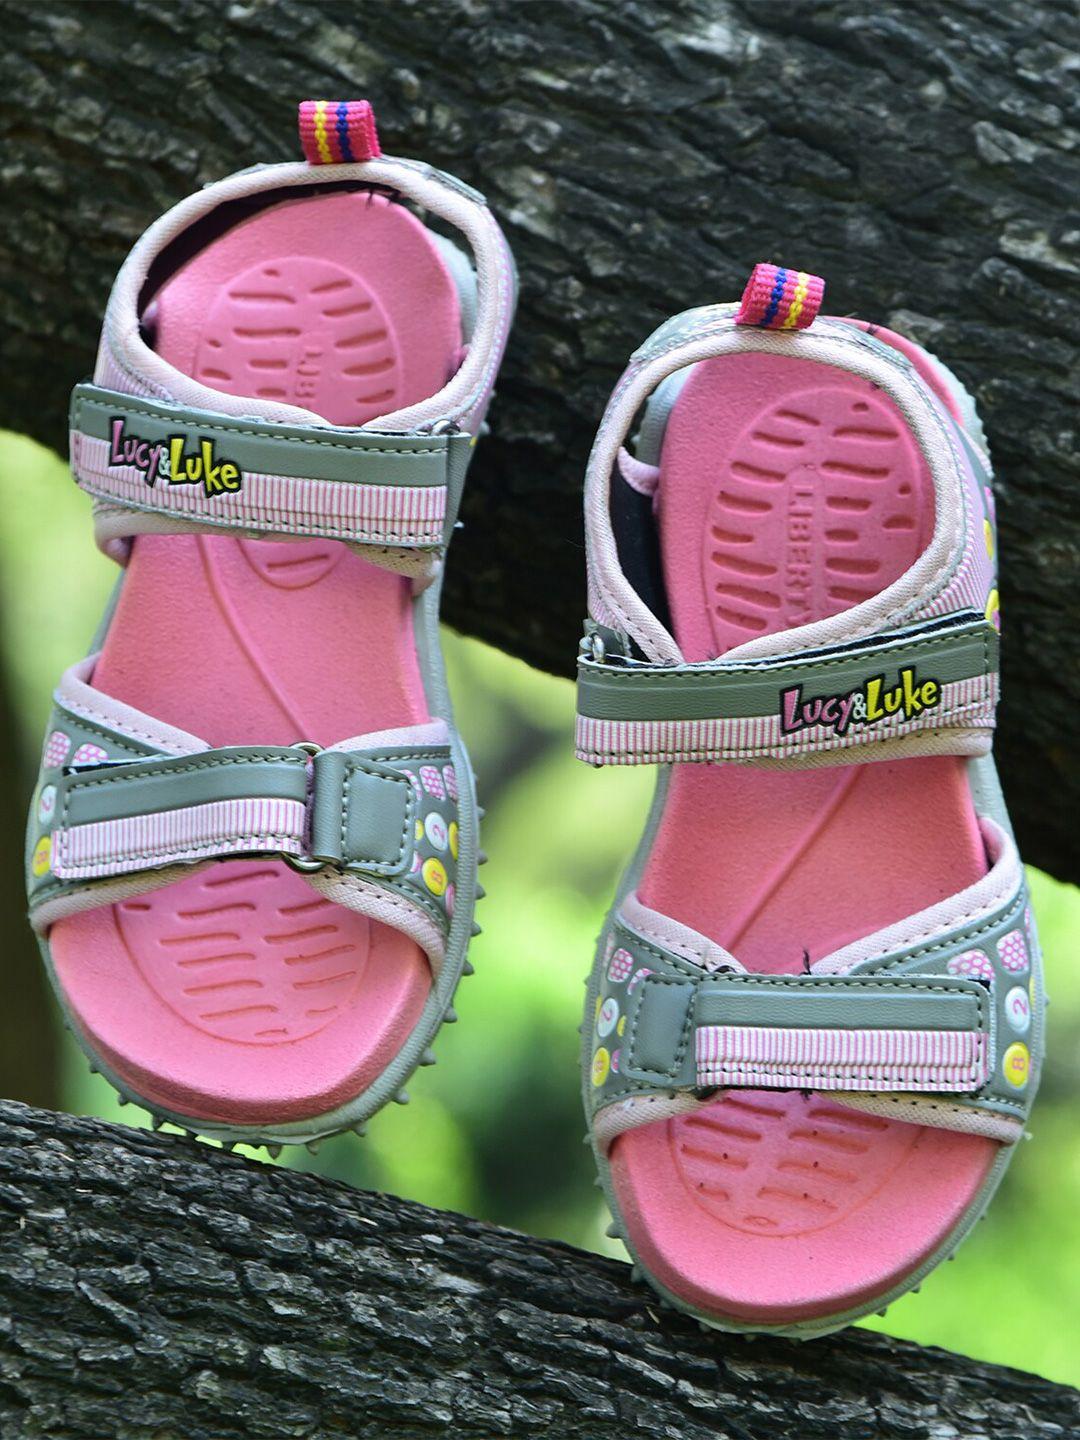 liberty-kids-printed-sports-sandals-with-velcro-closure